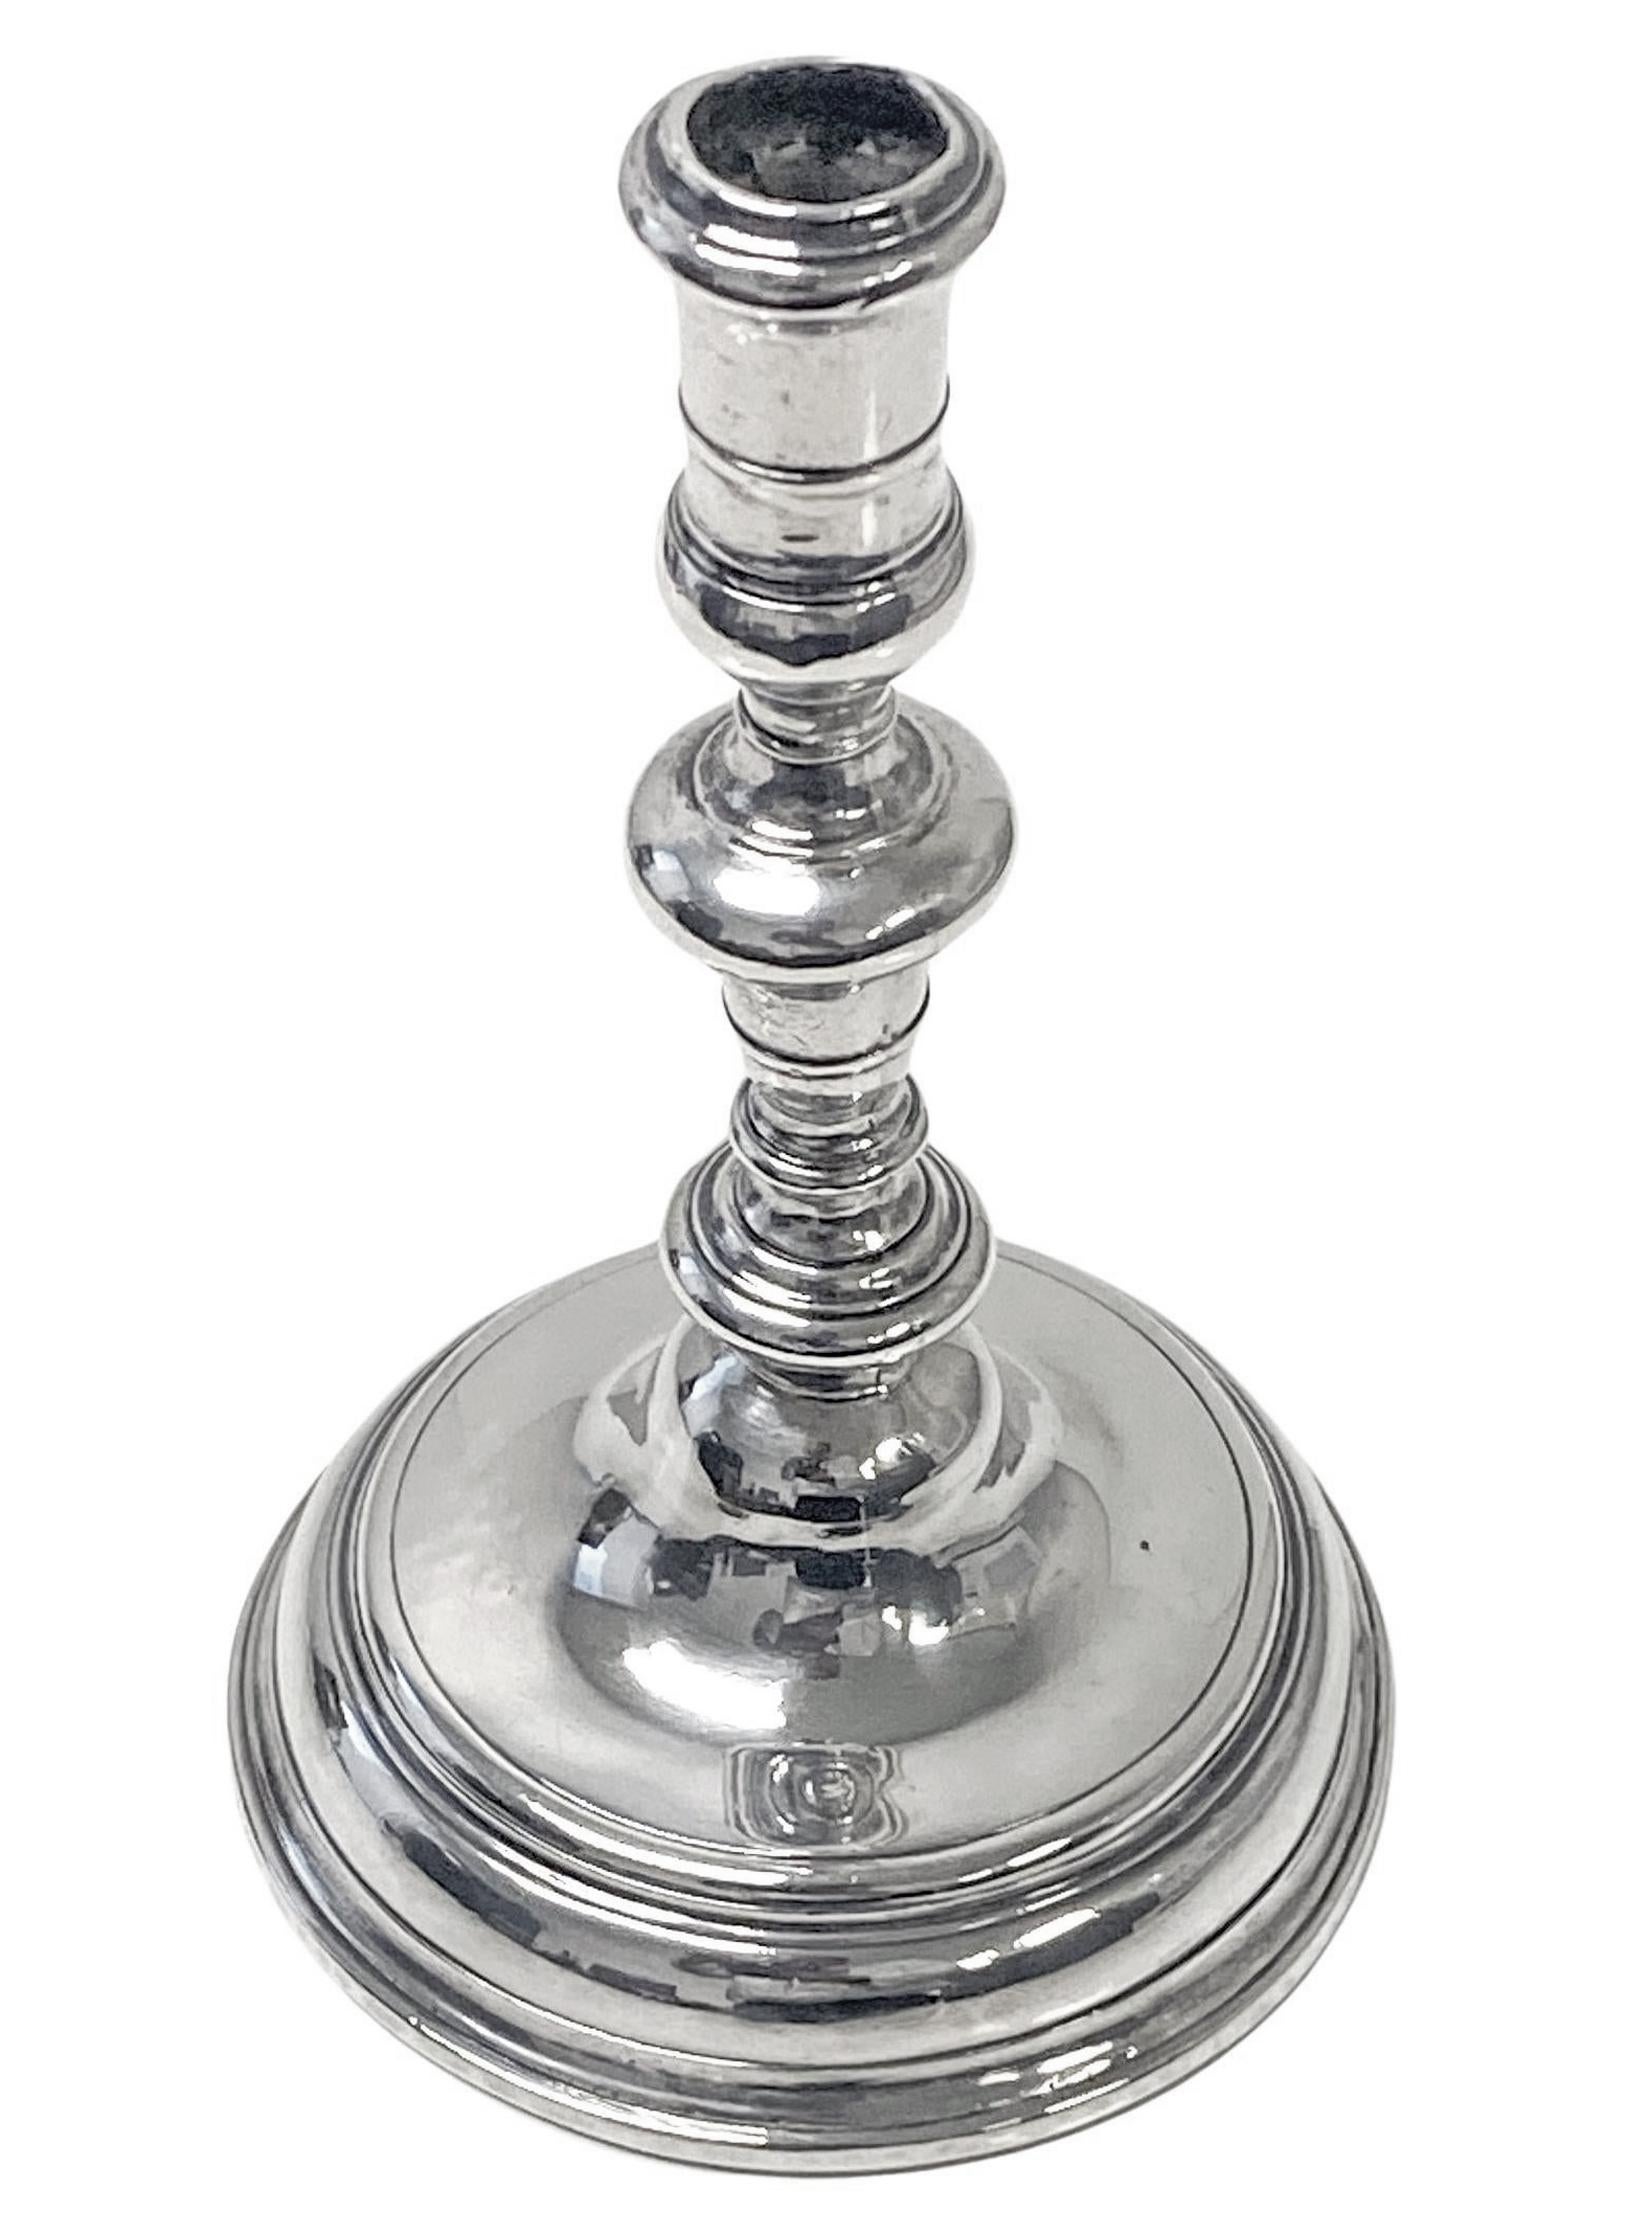 Queen Anne silver taperstick London 1704 Richard Syngin (Syng). The taperstick of plain early design with knopped stem and moulded circular base. Britannia standard silver.  Weight 106 grams, 3.40 troy ounces. Height 10.7cm. Base diameter 7.0cm.